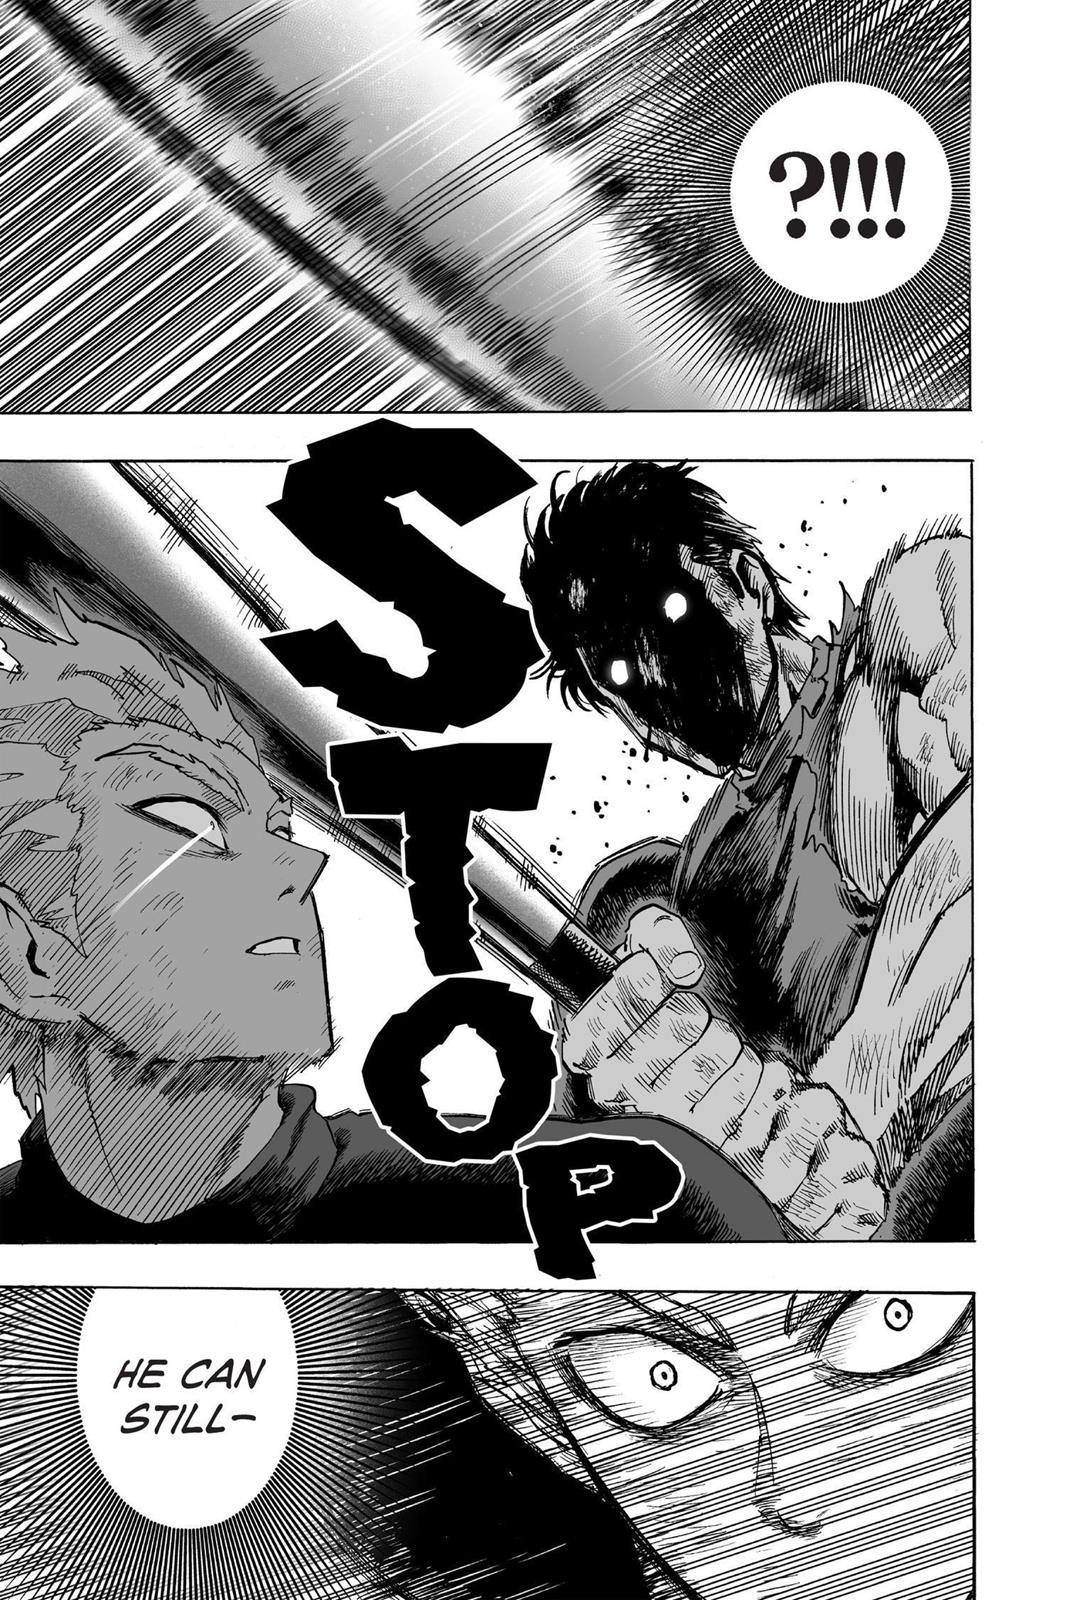 One-Punch Man, Punch 58 image 41